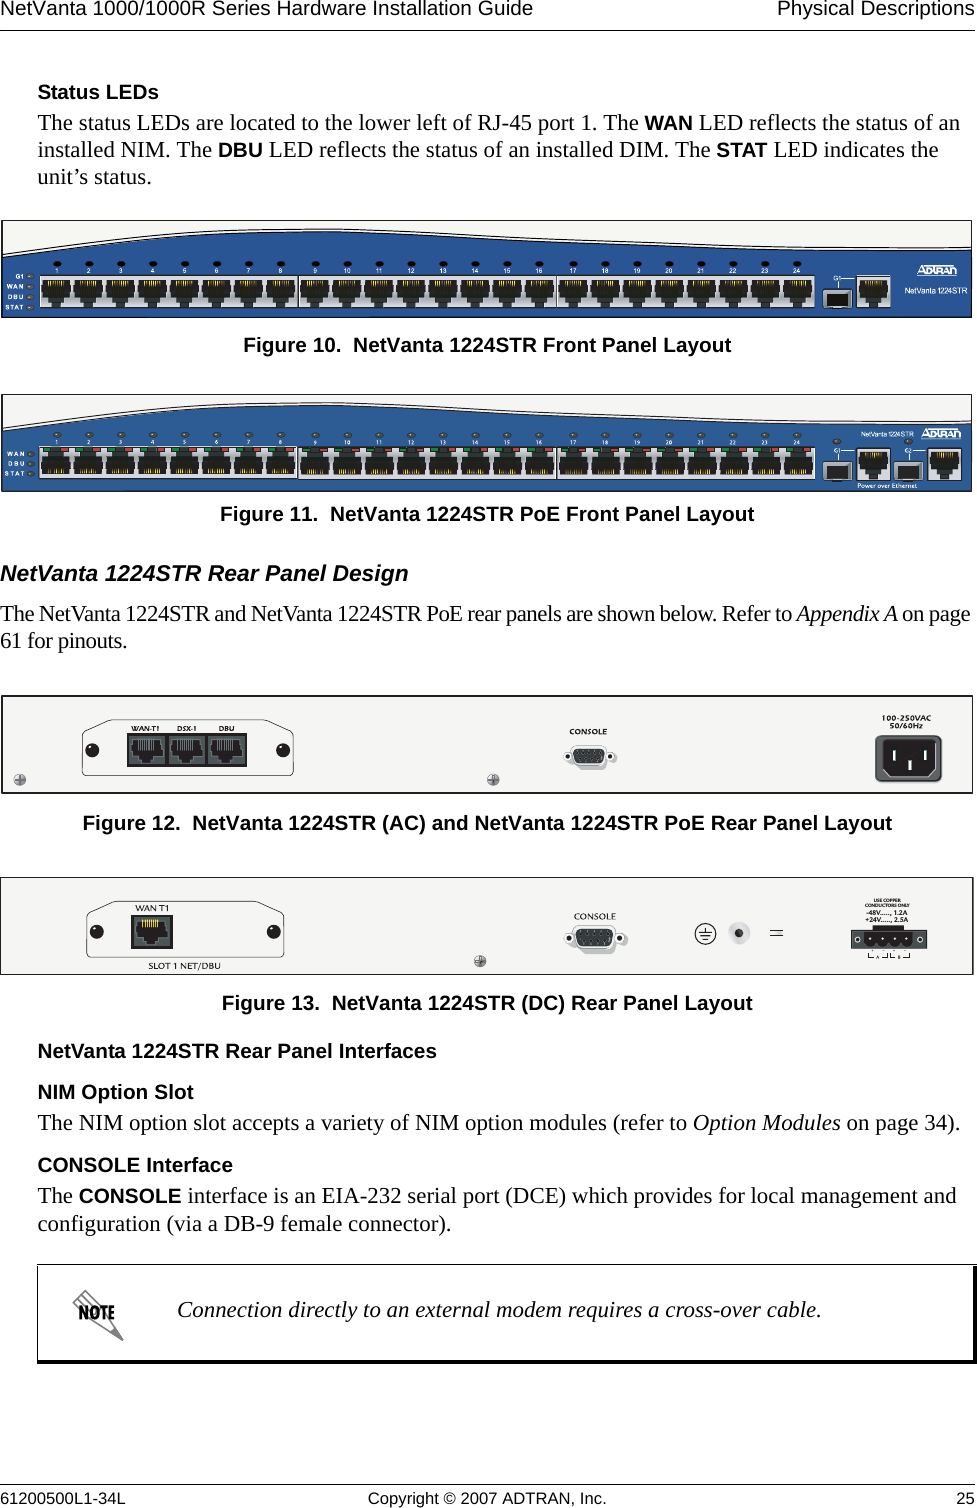 NetVanta 1000/1000R Series Hardware Installation Guide  Physical Descriptions61200500L1-34L Copyright © 2007 ADTRAN, Inc. 25Status LEDsThe status LEDs are located to the lower left of RJ-45 port 1. The WAN LED reflects the status of an installed NIM. The DBU LED reflects the status of an installed DIM. The STAT LED indicates the unit’s status.Figure 10.  NetVanta 1224STR Front Panel LayoutFigure 11.  NetVanta 1224STR PoE Front Panel LayoutNetVanta 1224STR Rear Panel DesignThe NetVanta 1224STR and NetVanta 1224STR PoE rear panels are shown below. Refer to Appendix A on page 61 for pinouts.Figure 12.  NetVanta 1224STR (AC) and NetVanta 1224STR PoE Rear Panel LayoutFigure 13.  NetVanta 1224STR (DC) Rear Panel LayoutNetVanta 1224STR Rear Panel InterfacesNIM Option SlotThe NIM option slot accepts a variety of NIM option modules (refer to Option Modules on page 34).CONSOLE InterfaceThe CONSOLE interface is an EIA-232 serial port (DCE) which provides for local management and configuration (via a DB-9 female connector).Connection directly to an external modem requires a cross-over cable.-48V....., 1.2A+24V....., 2.5AUSE COPPERCONDUCTORS ONLY